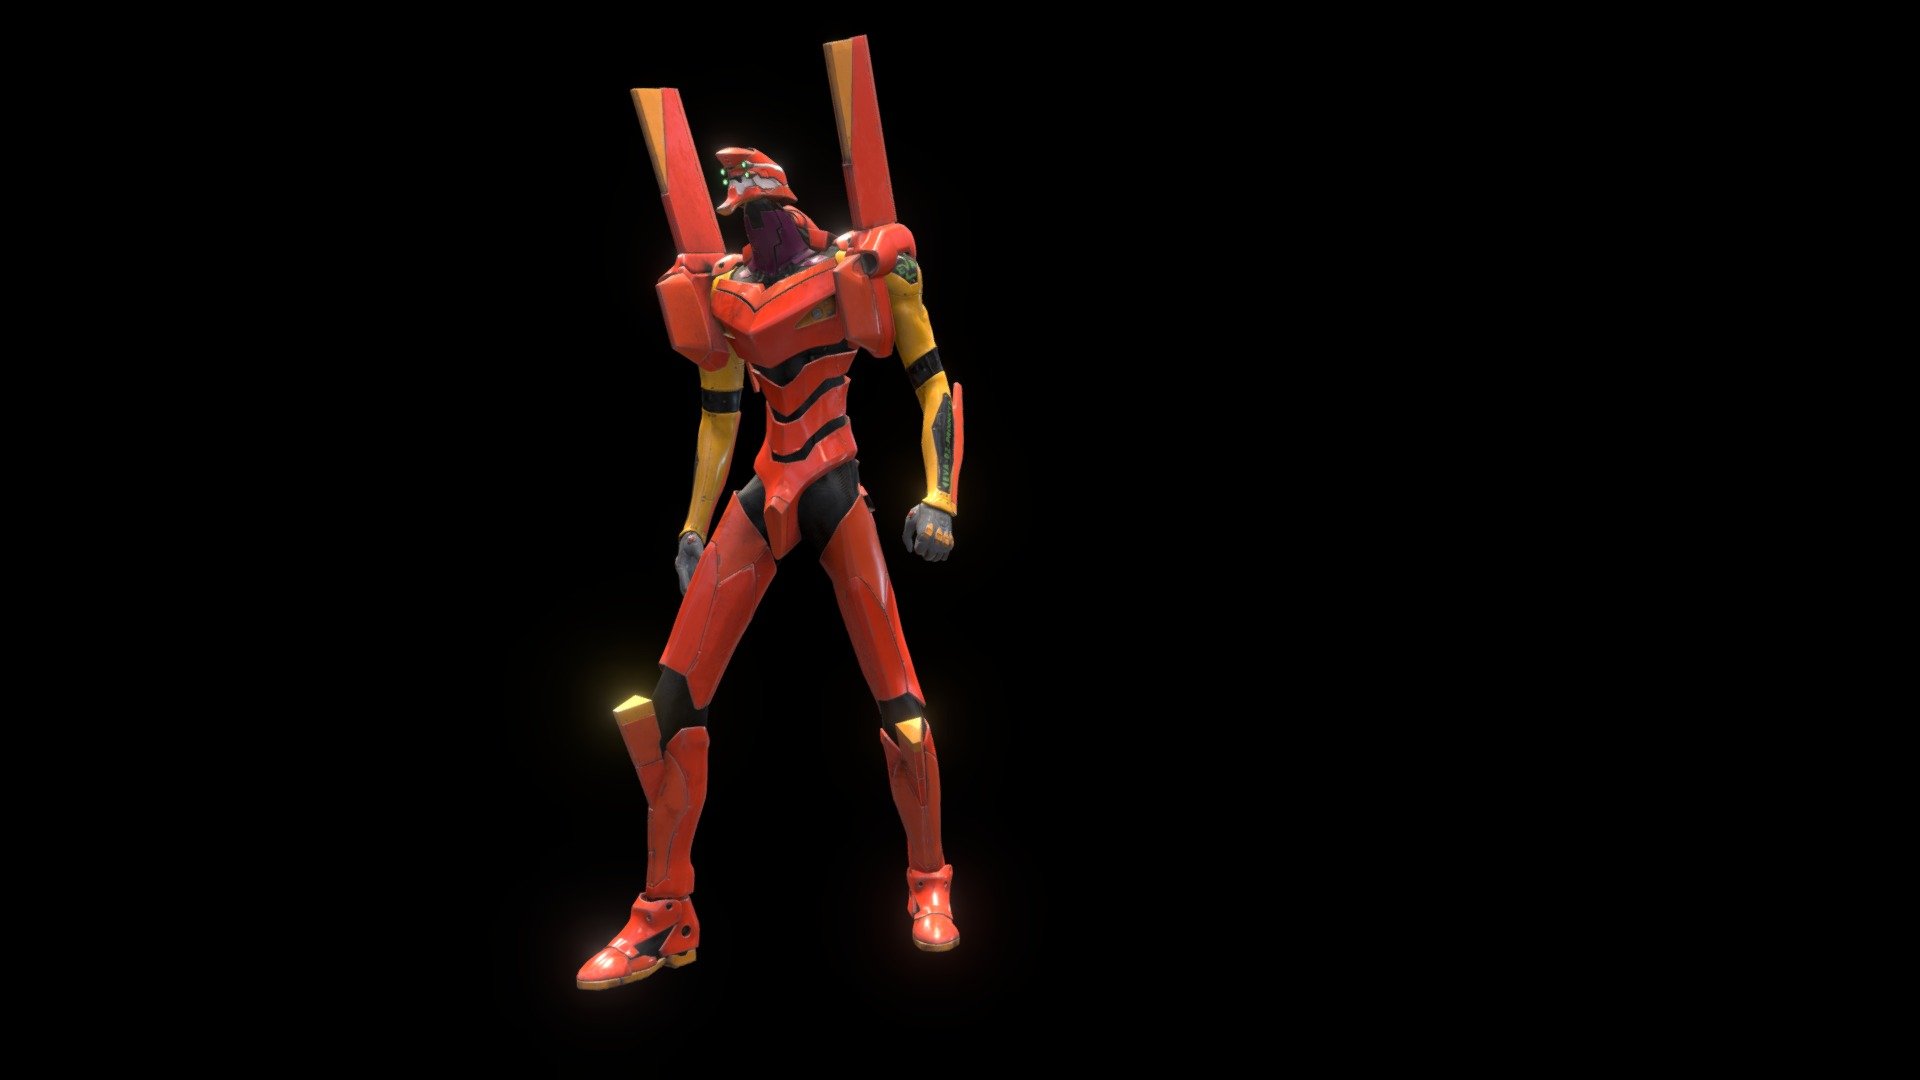 Just some Eva art - really needs some extra work on a lot of the parts, especially the feet; but I'm putting it down for now. Blender for everything except materials; that's substance 3d model